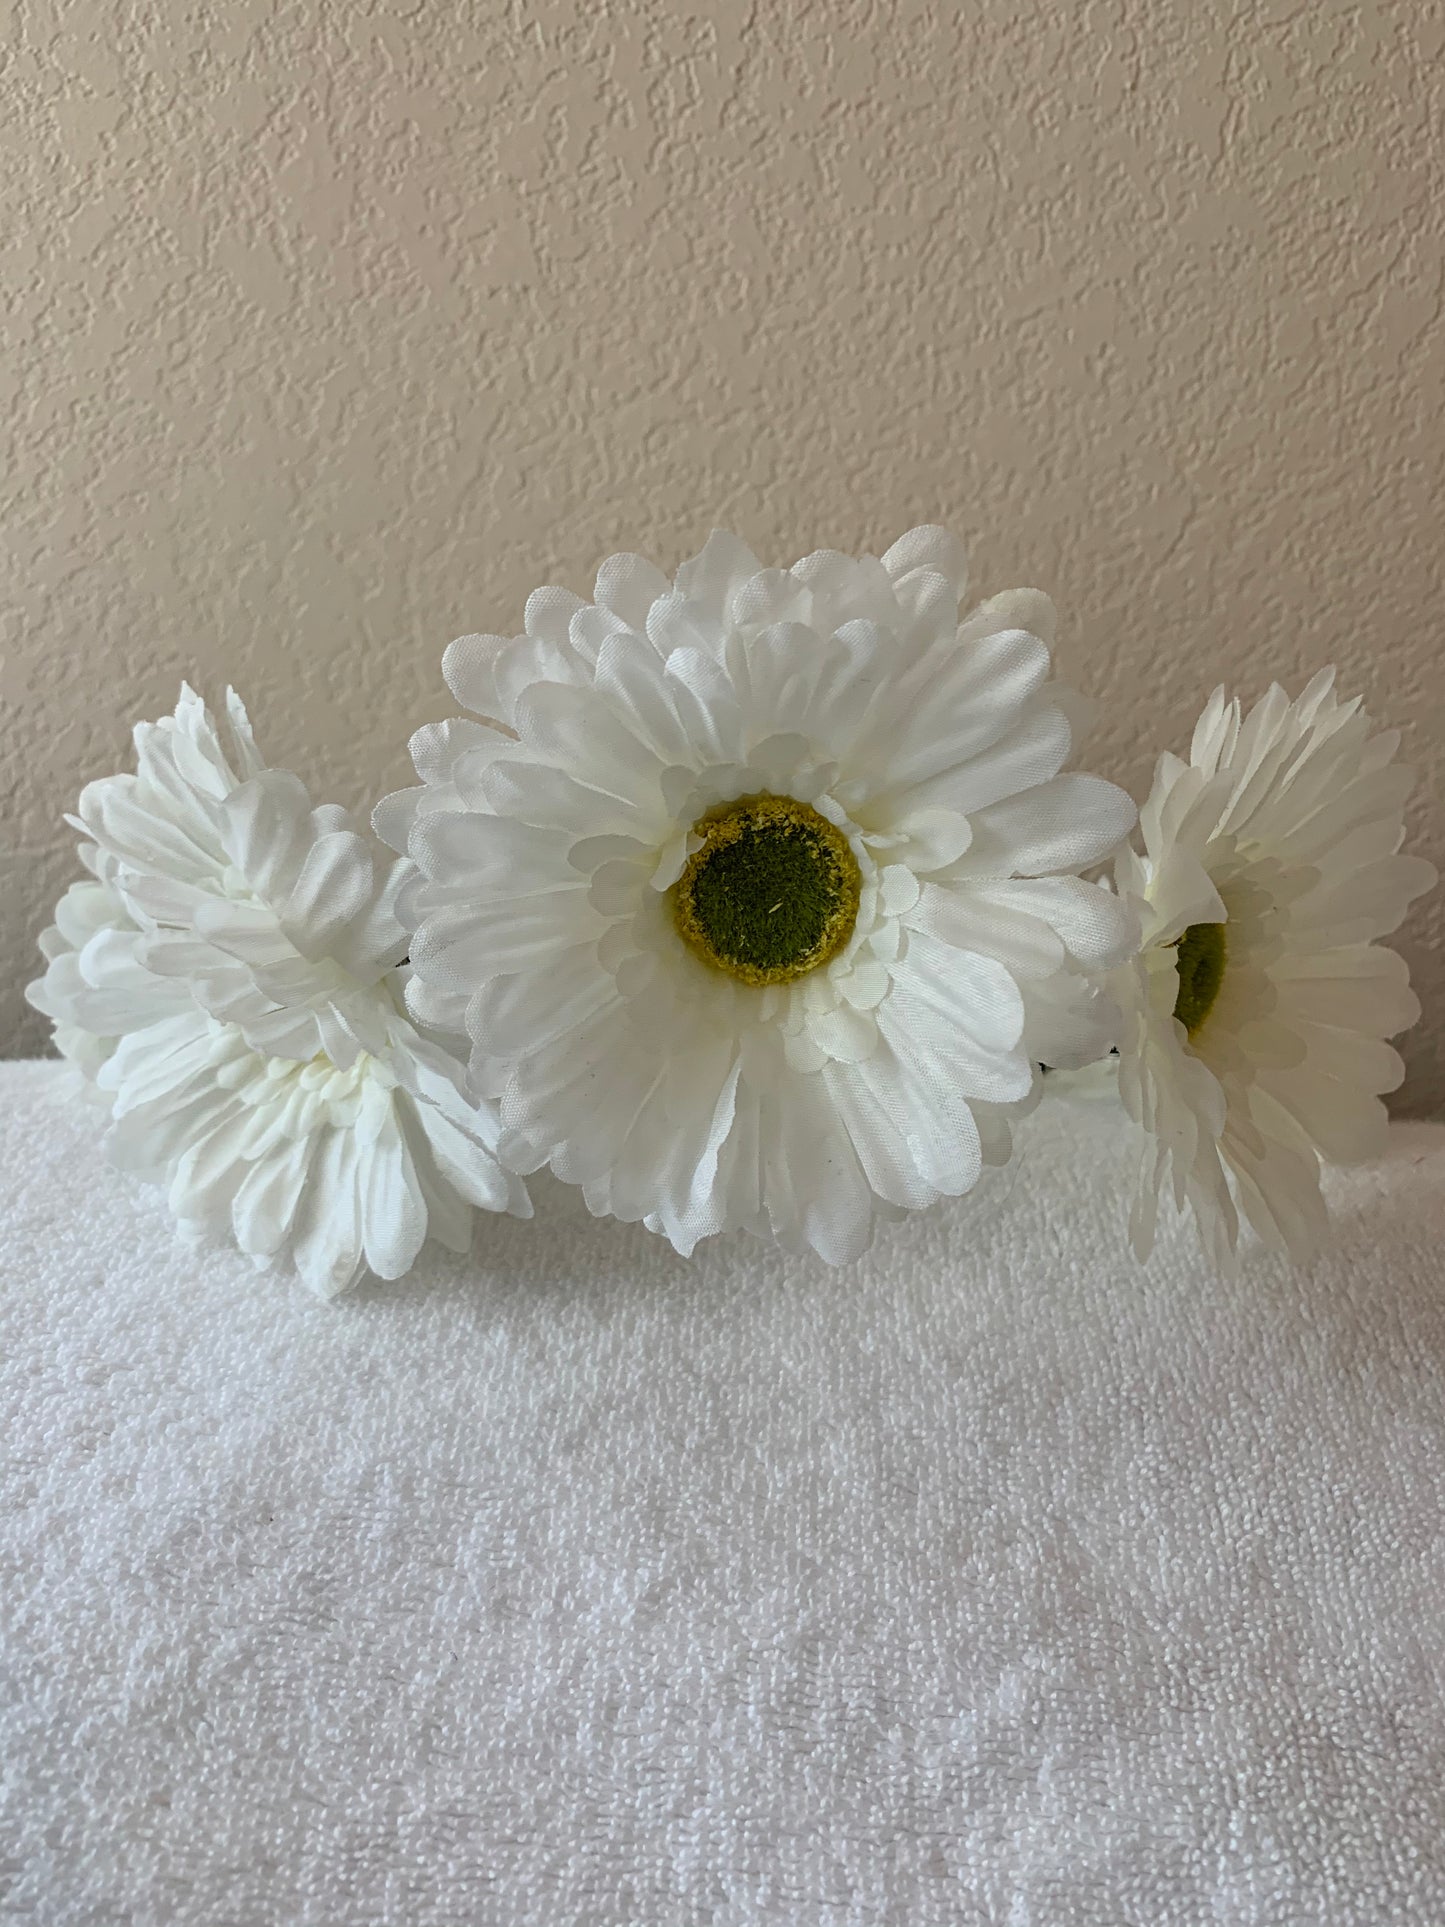 Large Wreath Lighted - All White Daisies